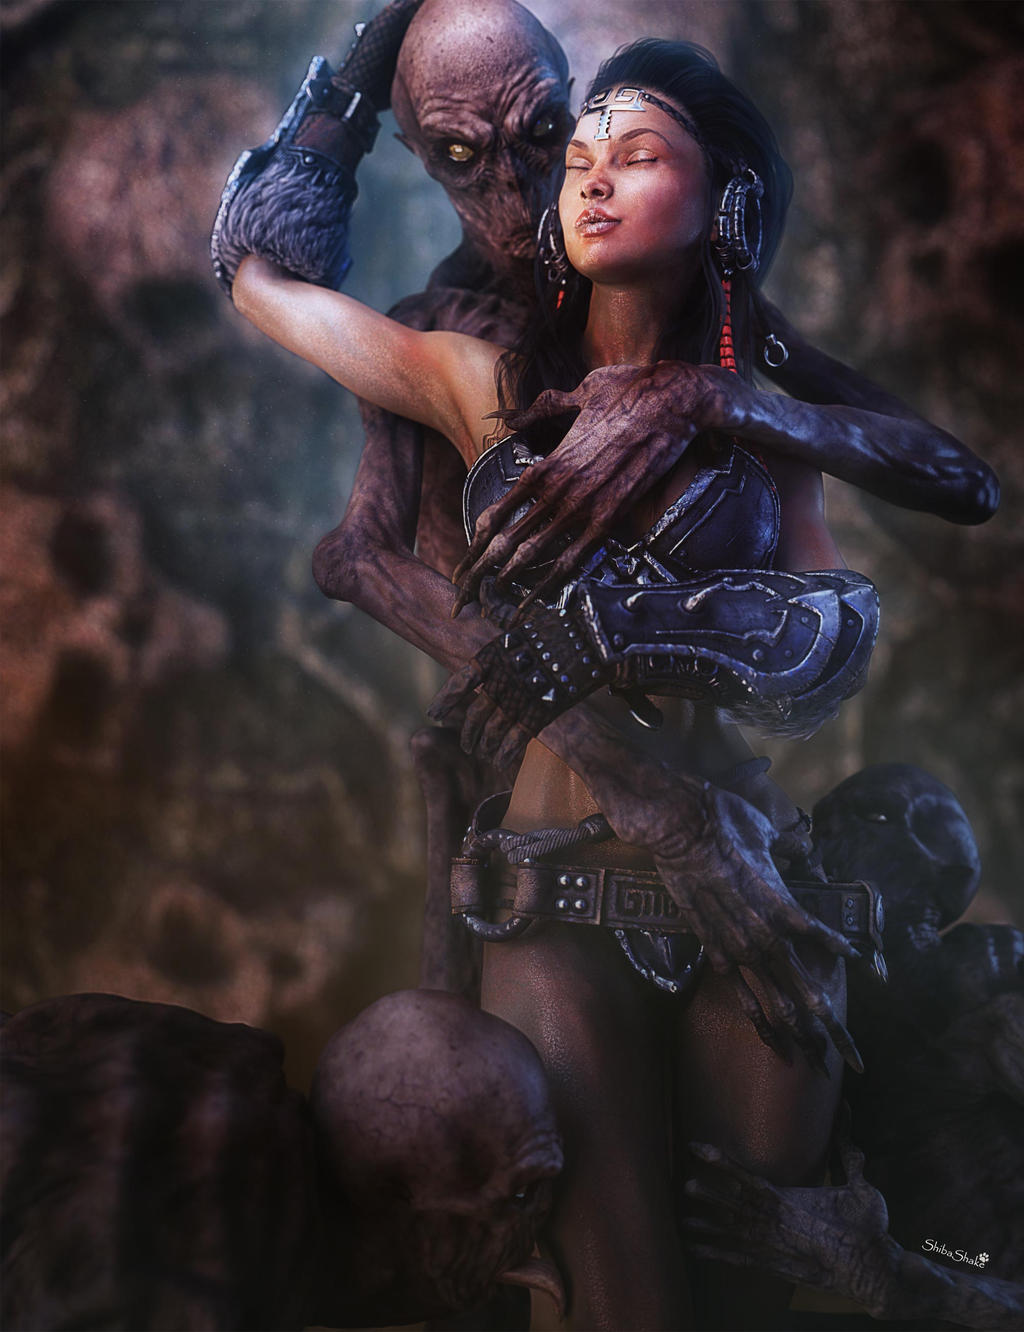 Warrior girl in armor surrounded by hugging and kissing monsters. Gothic fantasy woman art. Daz Studio Iray image.